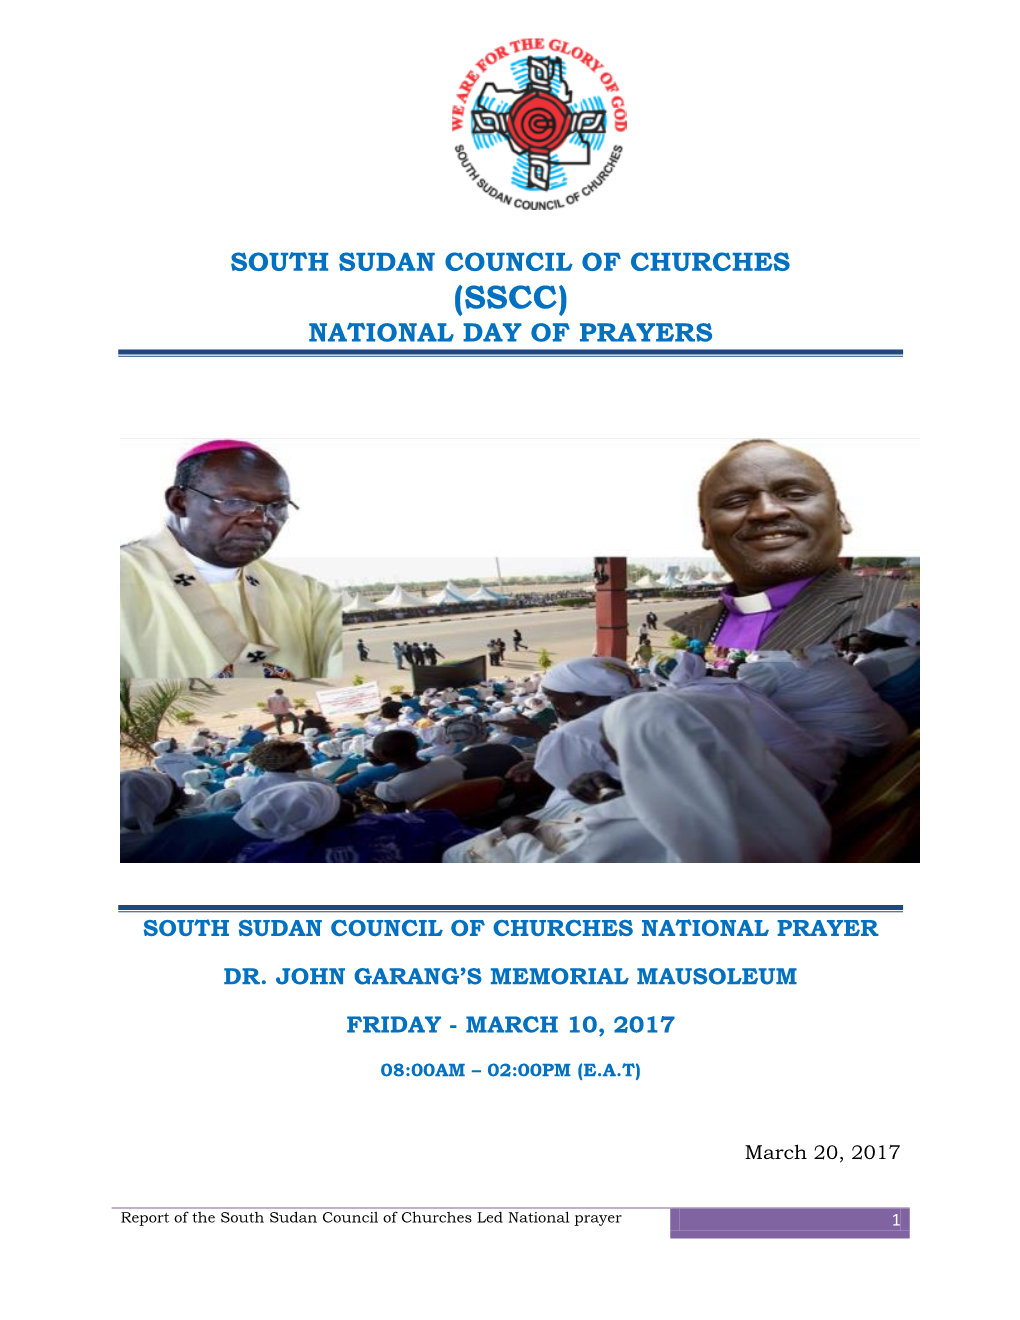 South Sudan Council of Churches, National Prayer Report